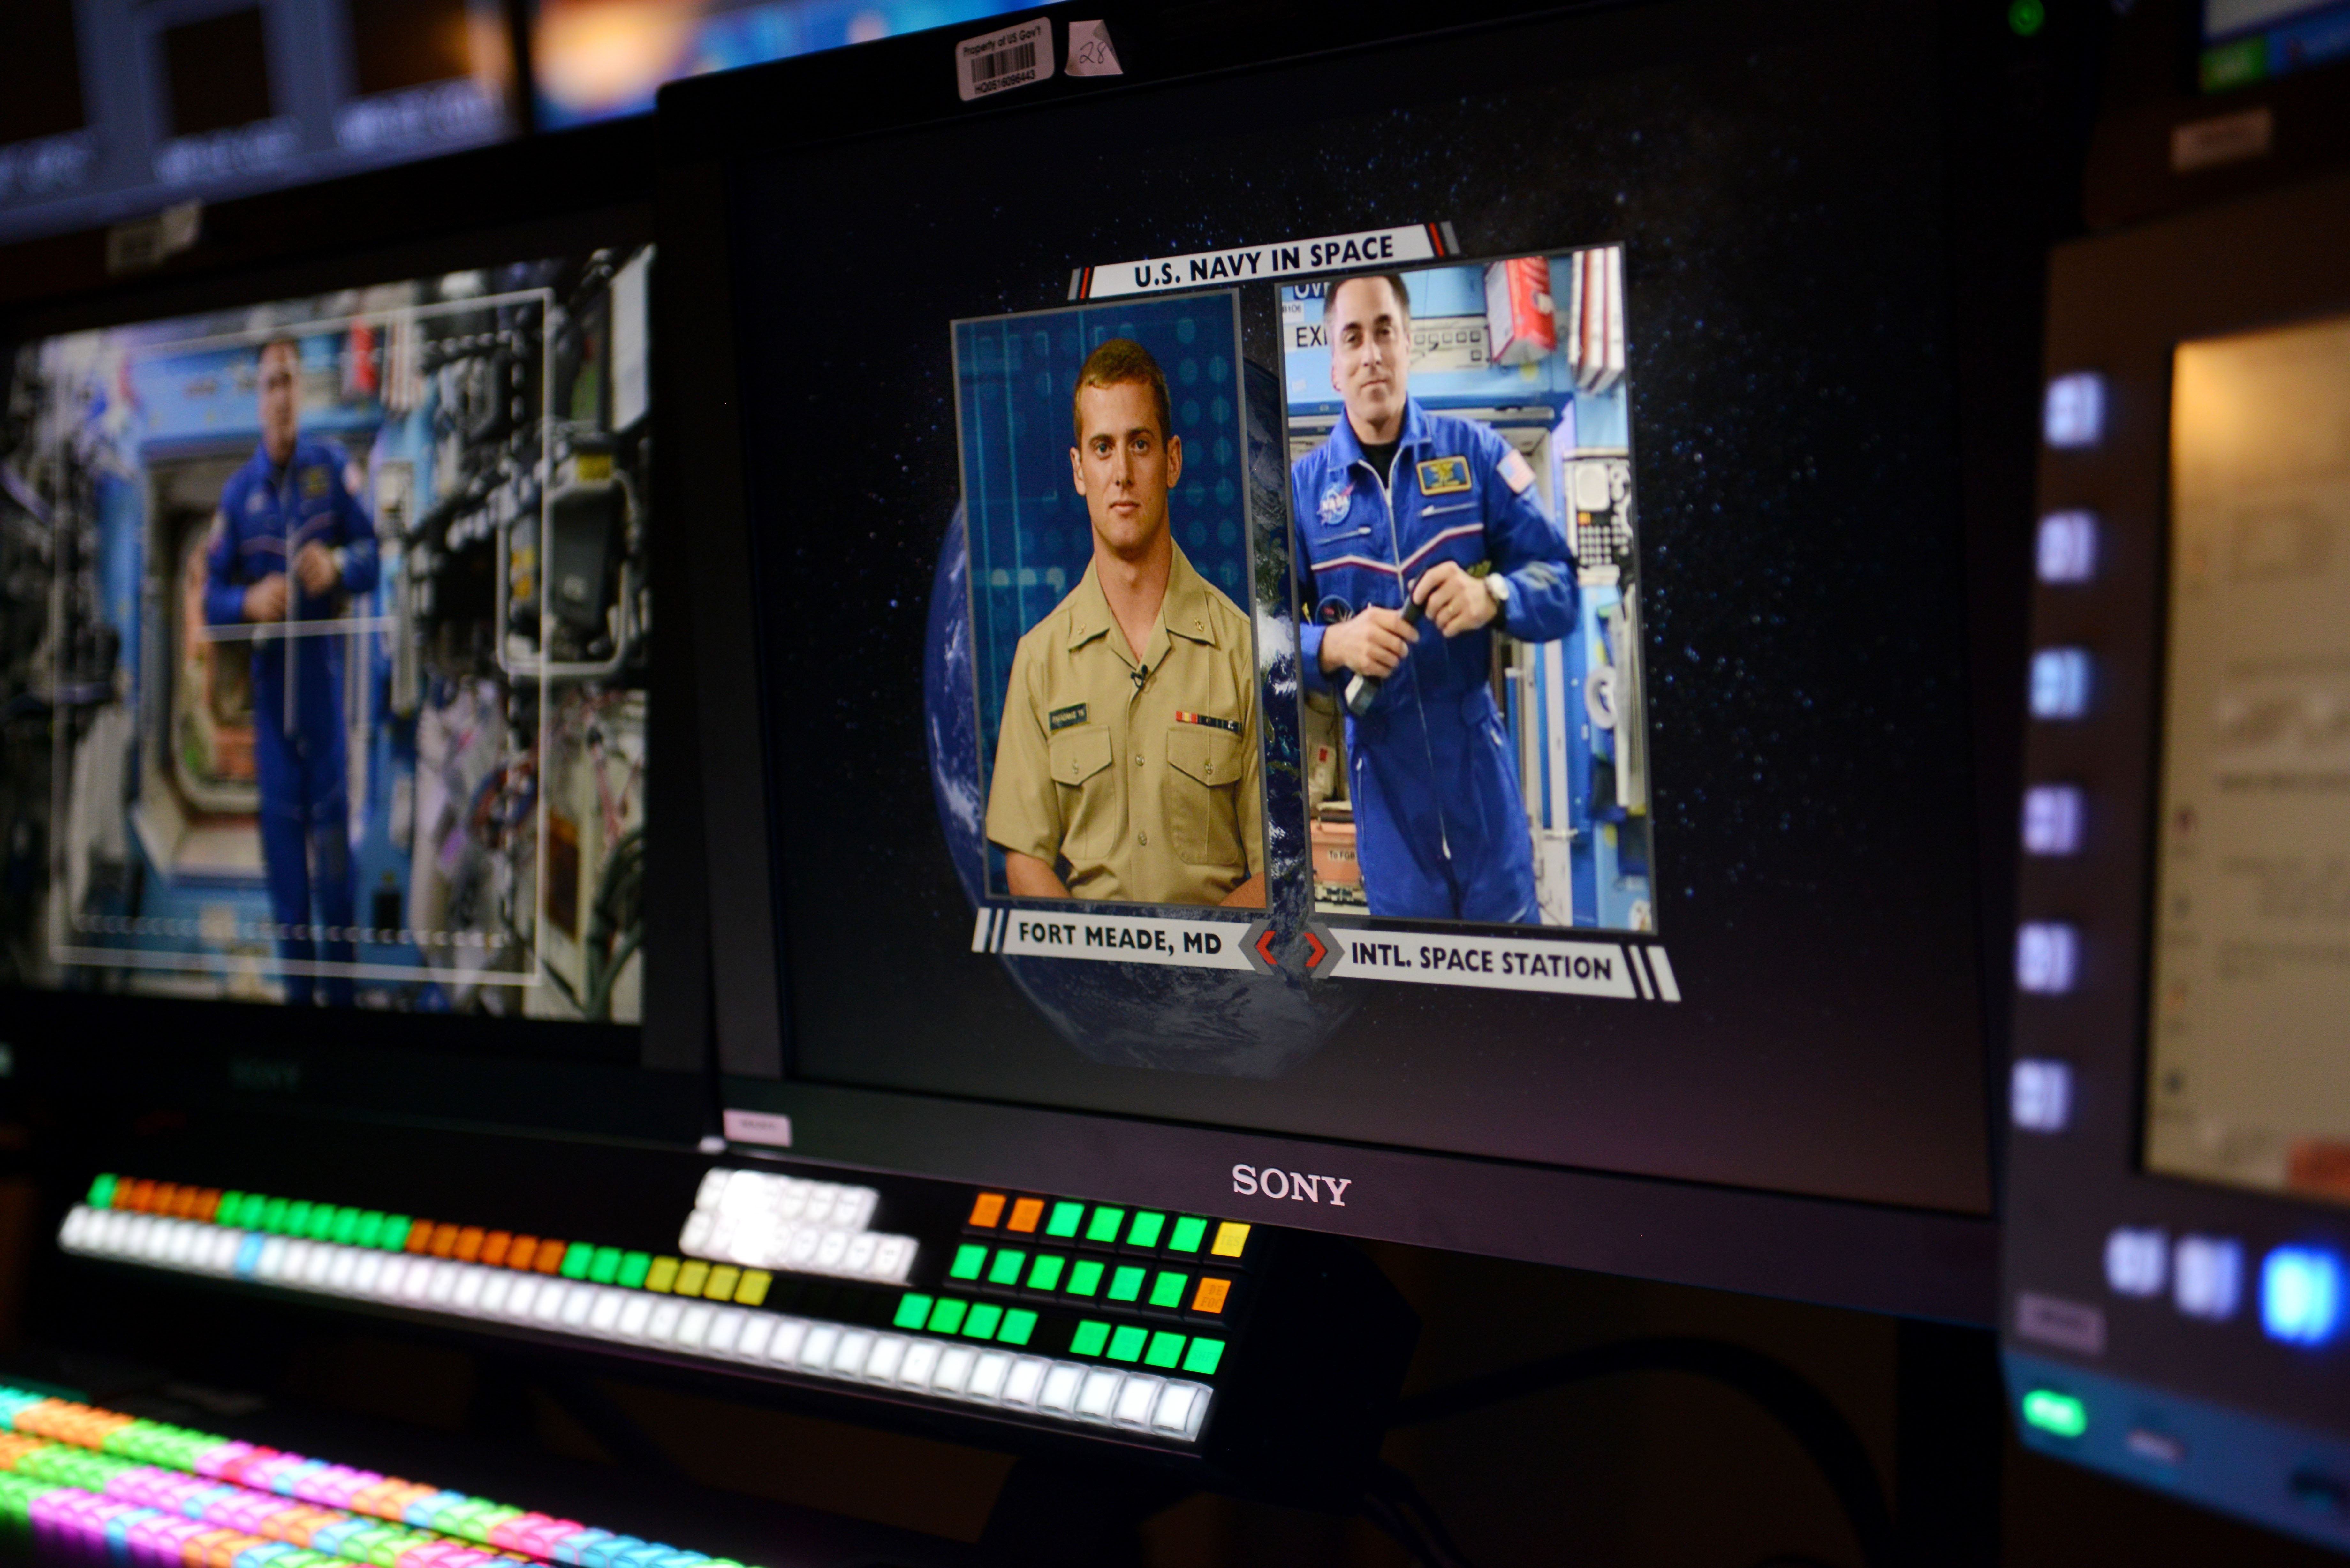 Navy SEAL Cmdr. Christopher J. Cassidy, an astronaut aboard the International Space Station, is interviewed on the Navy Live blog by U.S. Naval Academy Midshipman 2nd Class Lucas Papadakis on Aug. 2, 2013.